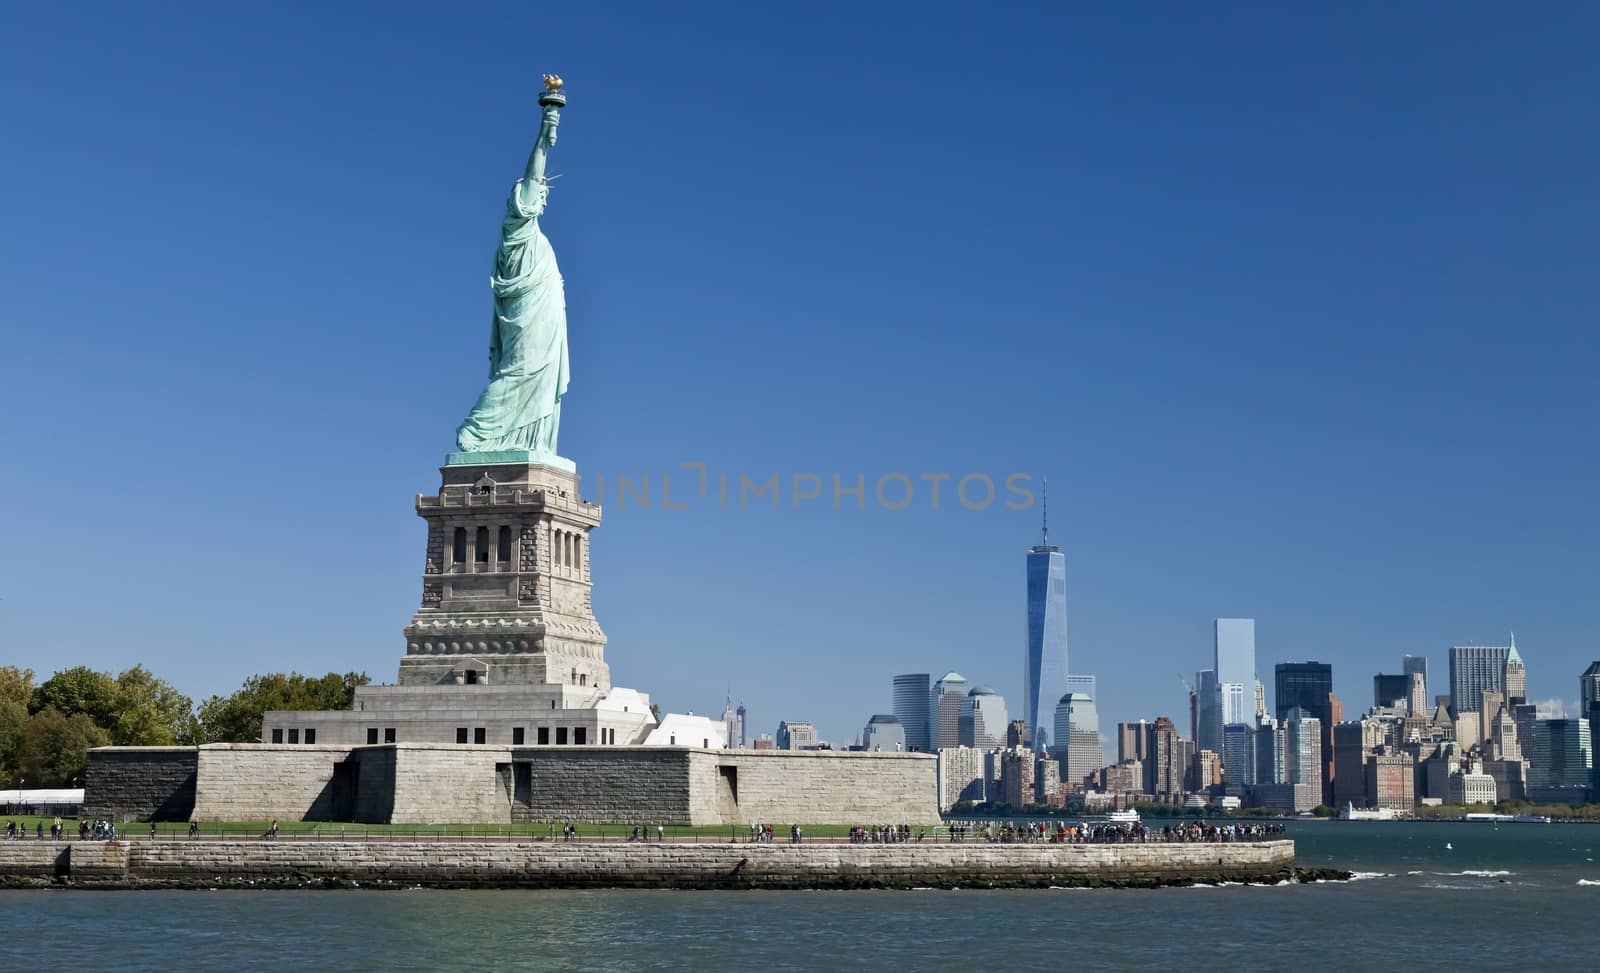 The Statue of Liberty at New York City with the Freedom Tower